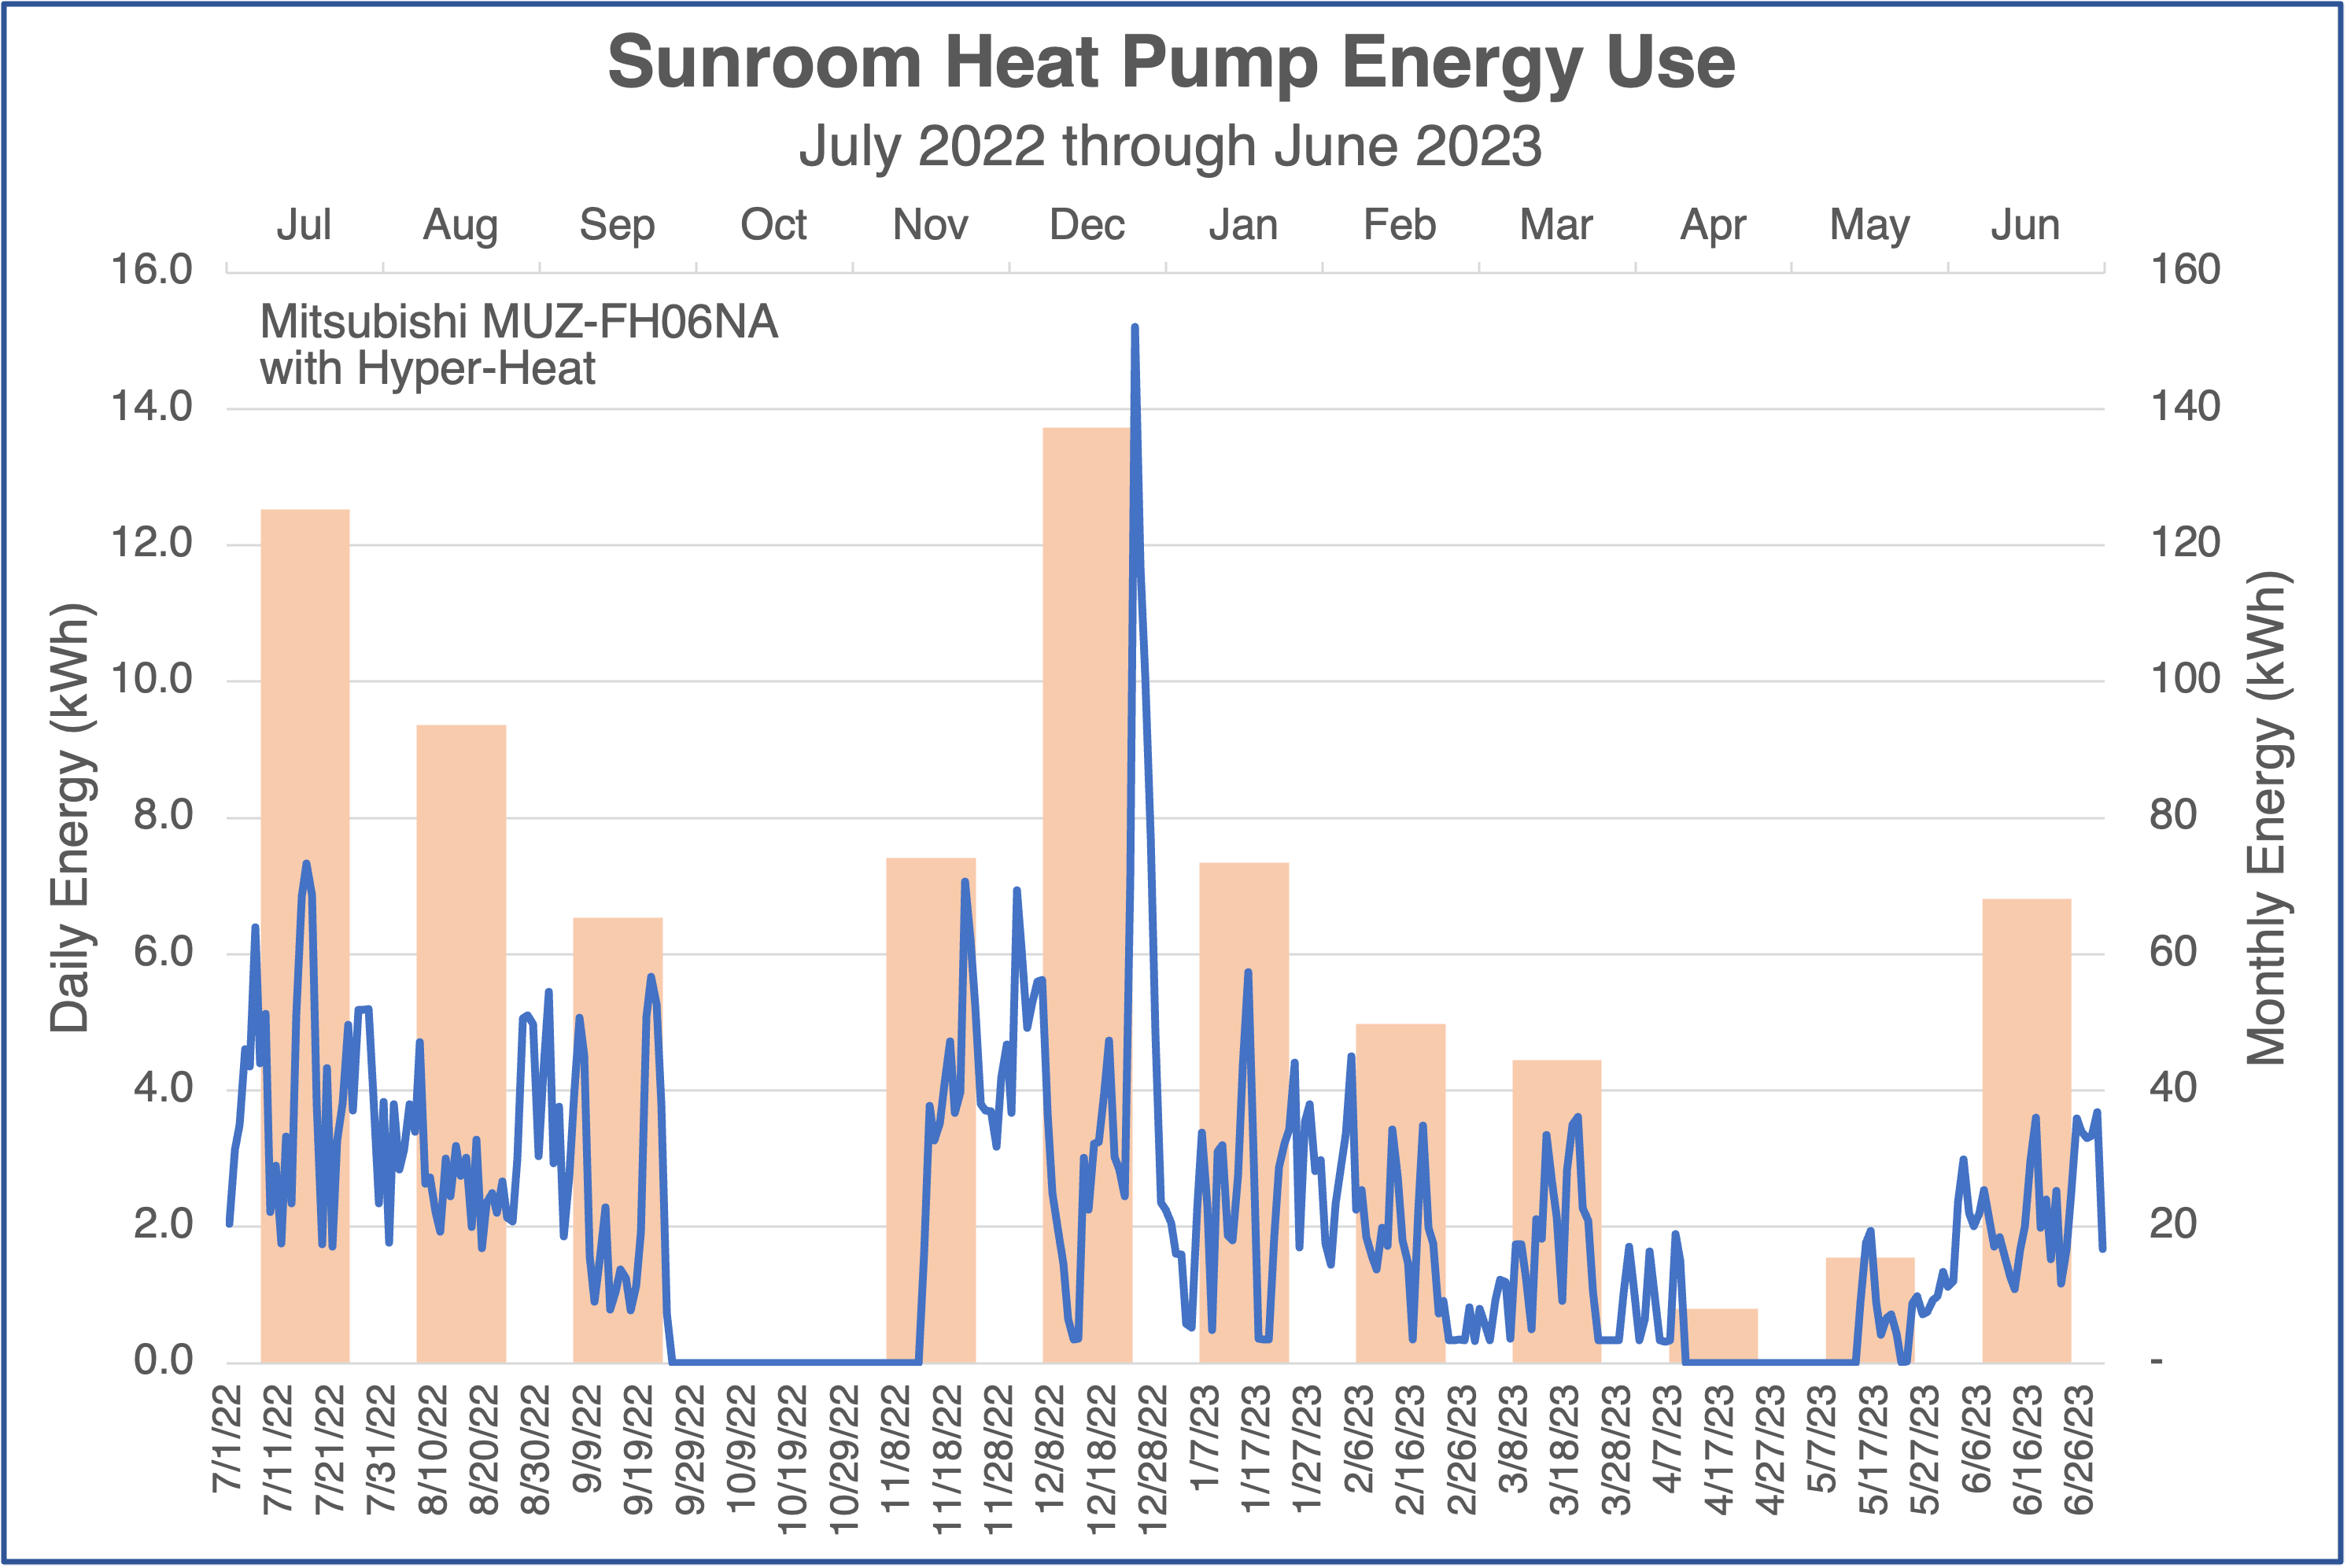 Sunroom heat pump energy use, daily and monthly